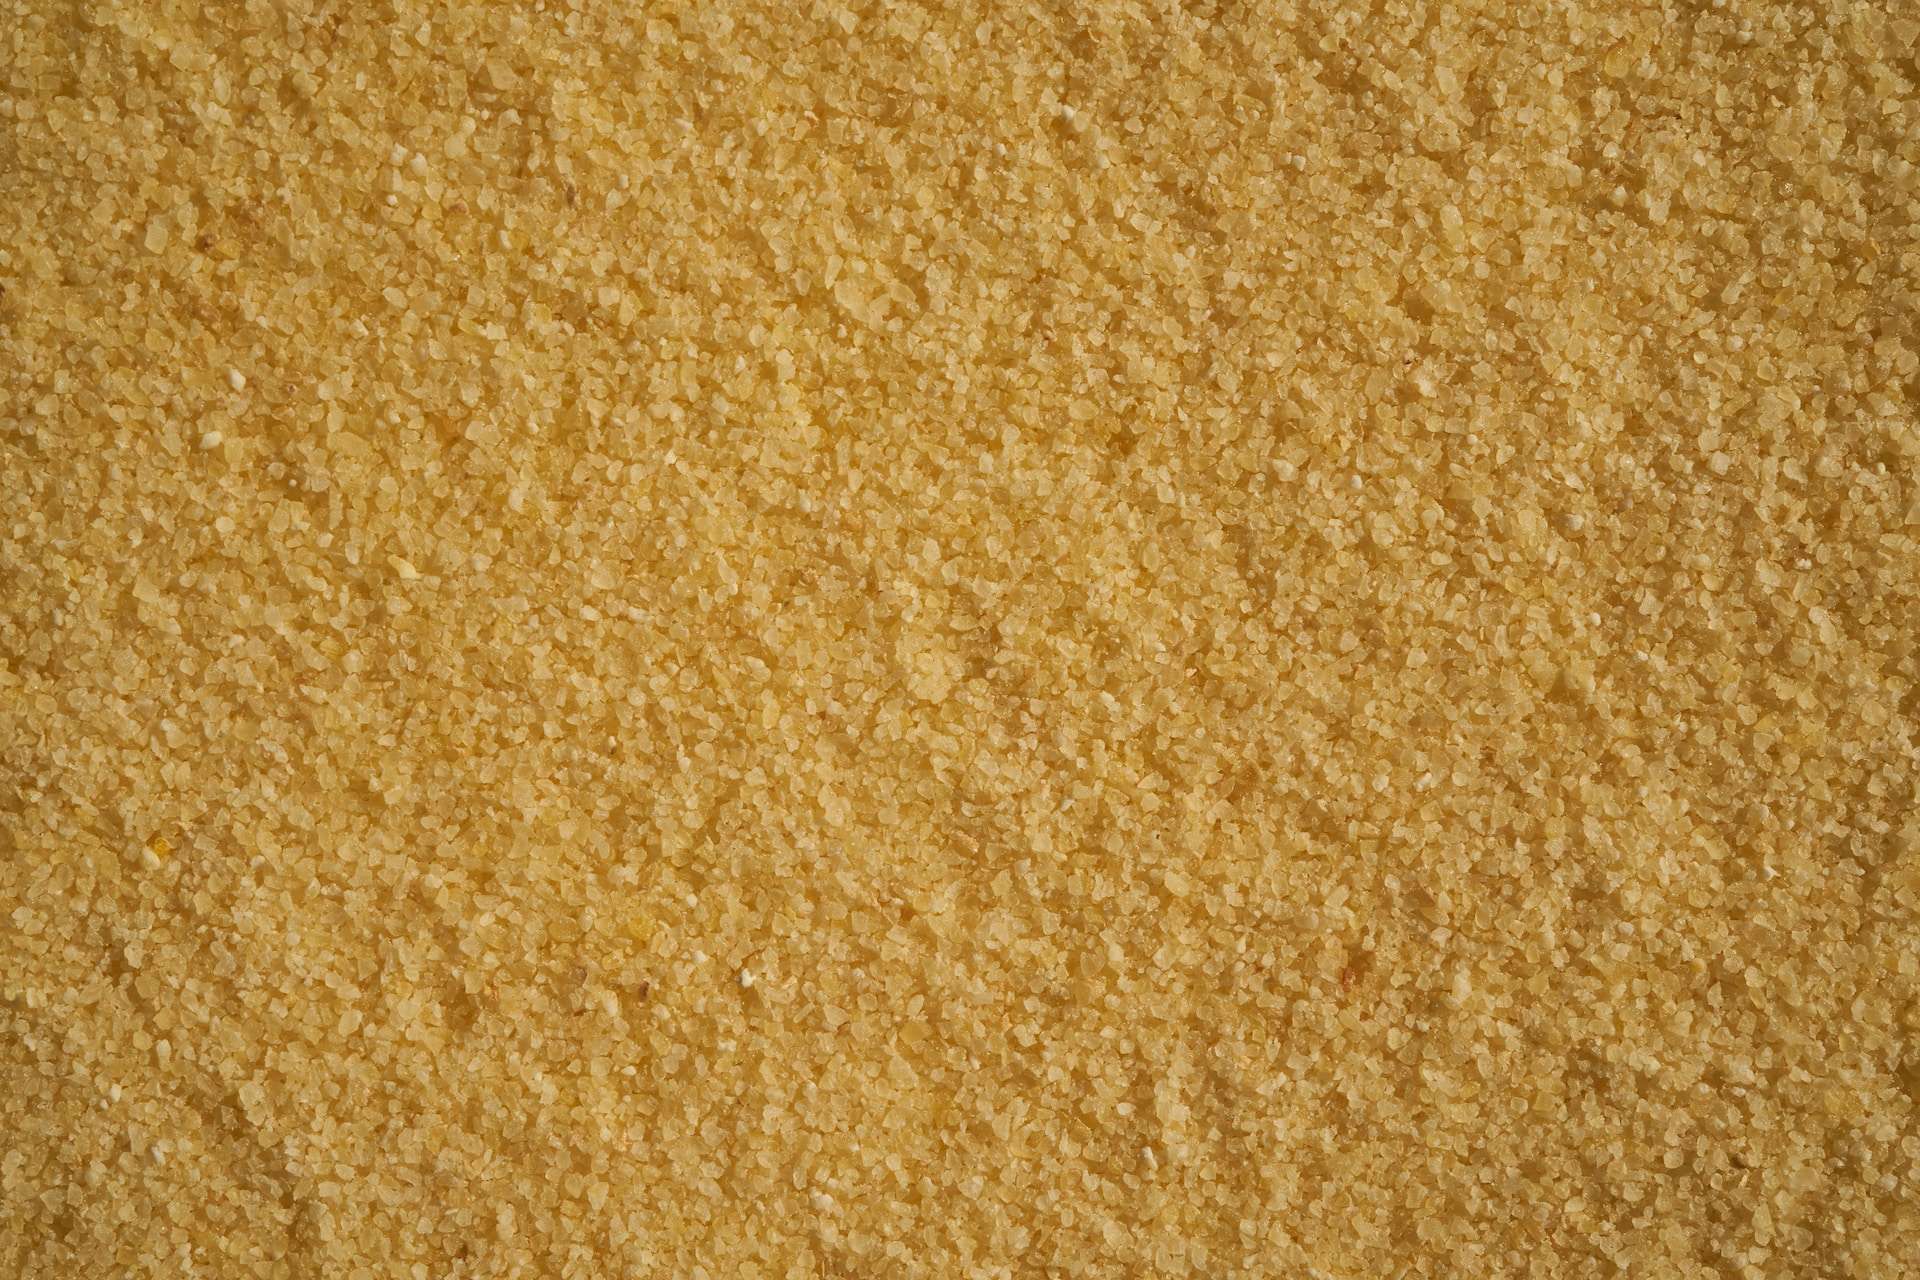 20-facts-about-semolina